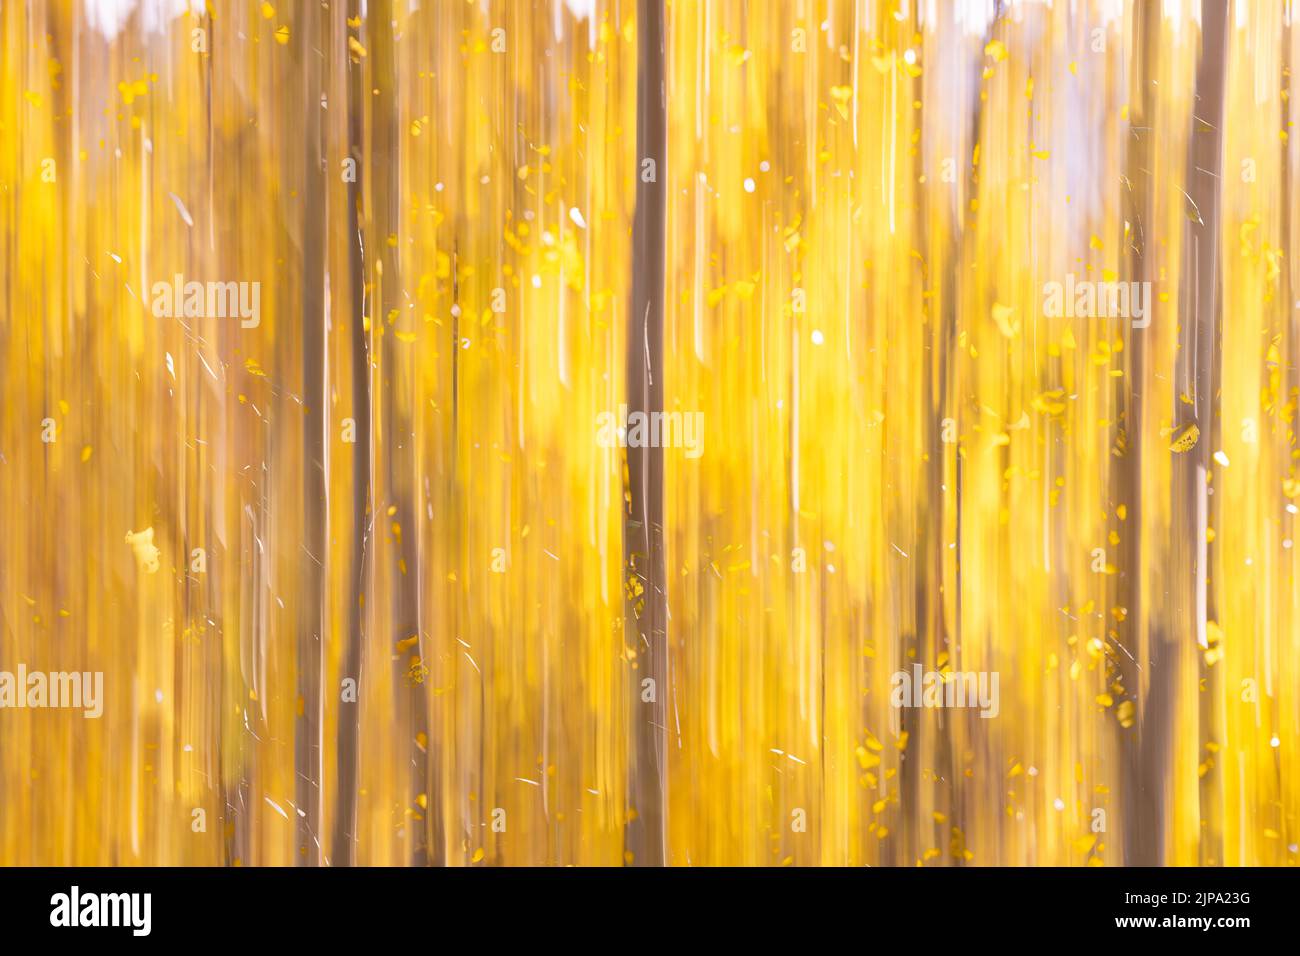 Golden Yellow Aspen Tree Grove in Autumn Abstract Blurred by Intentional Camera Movement Stock Photo